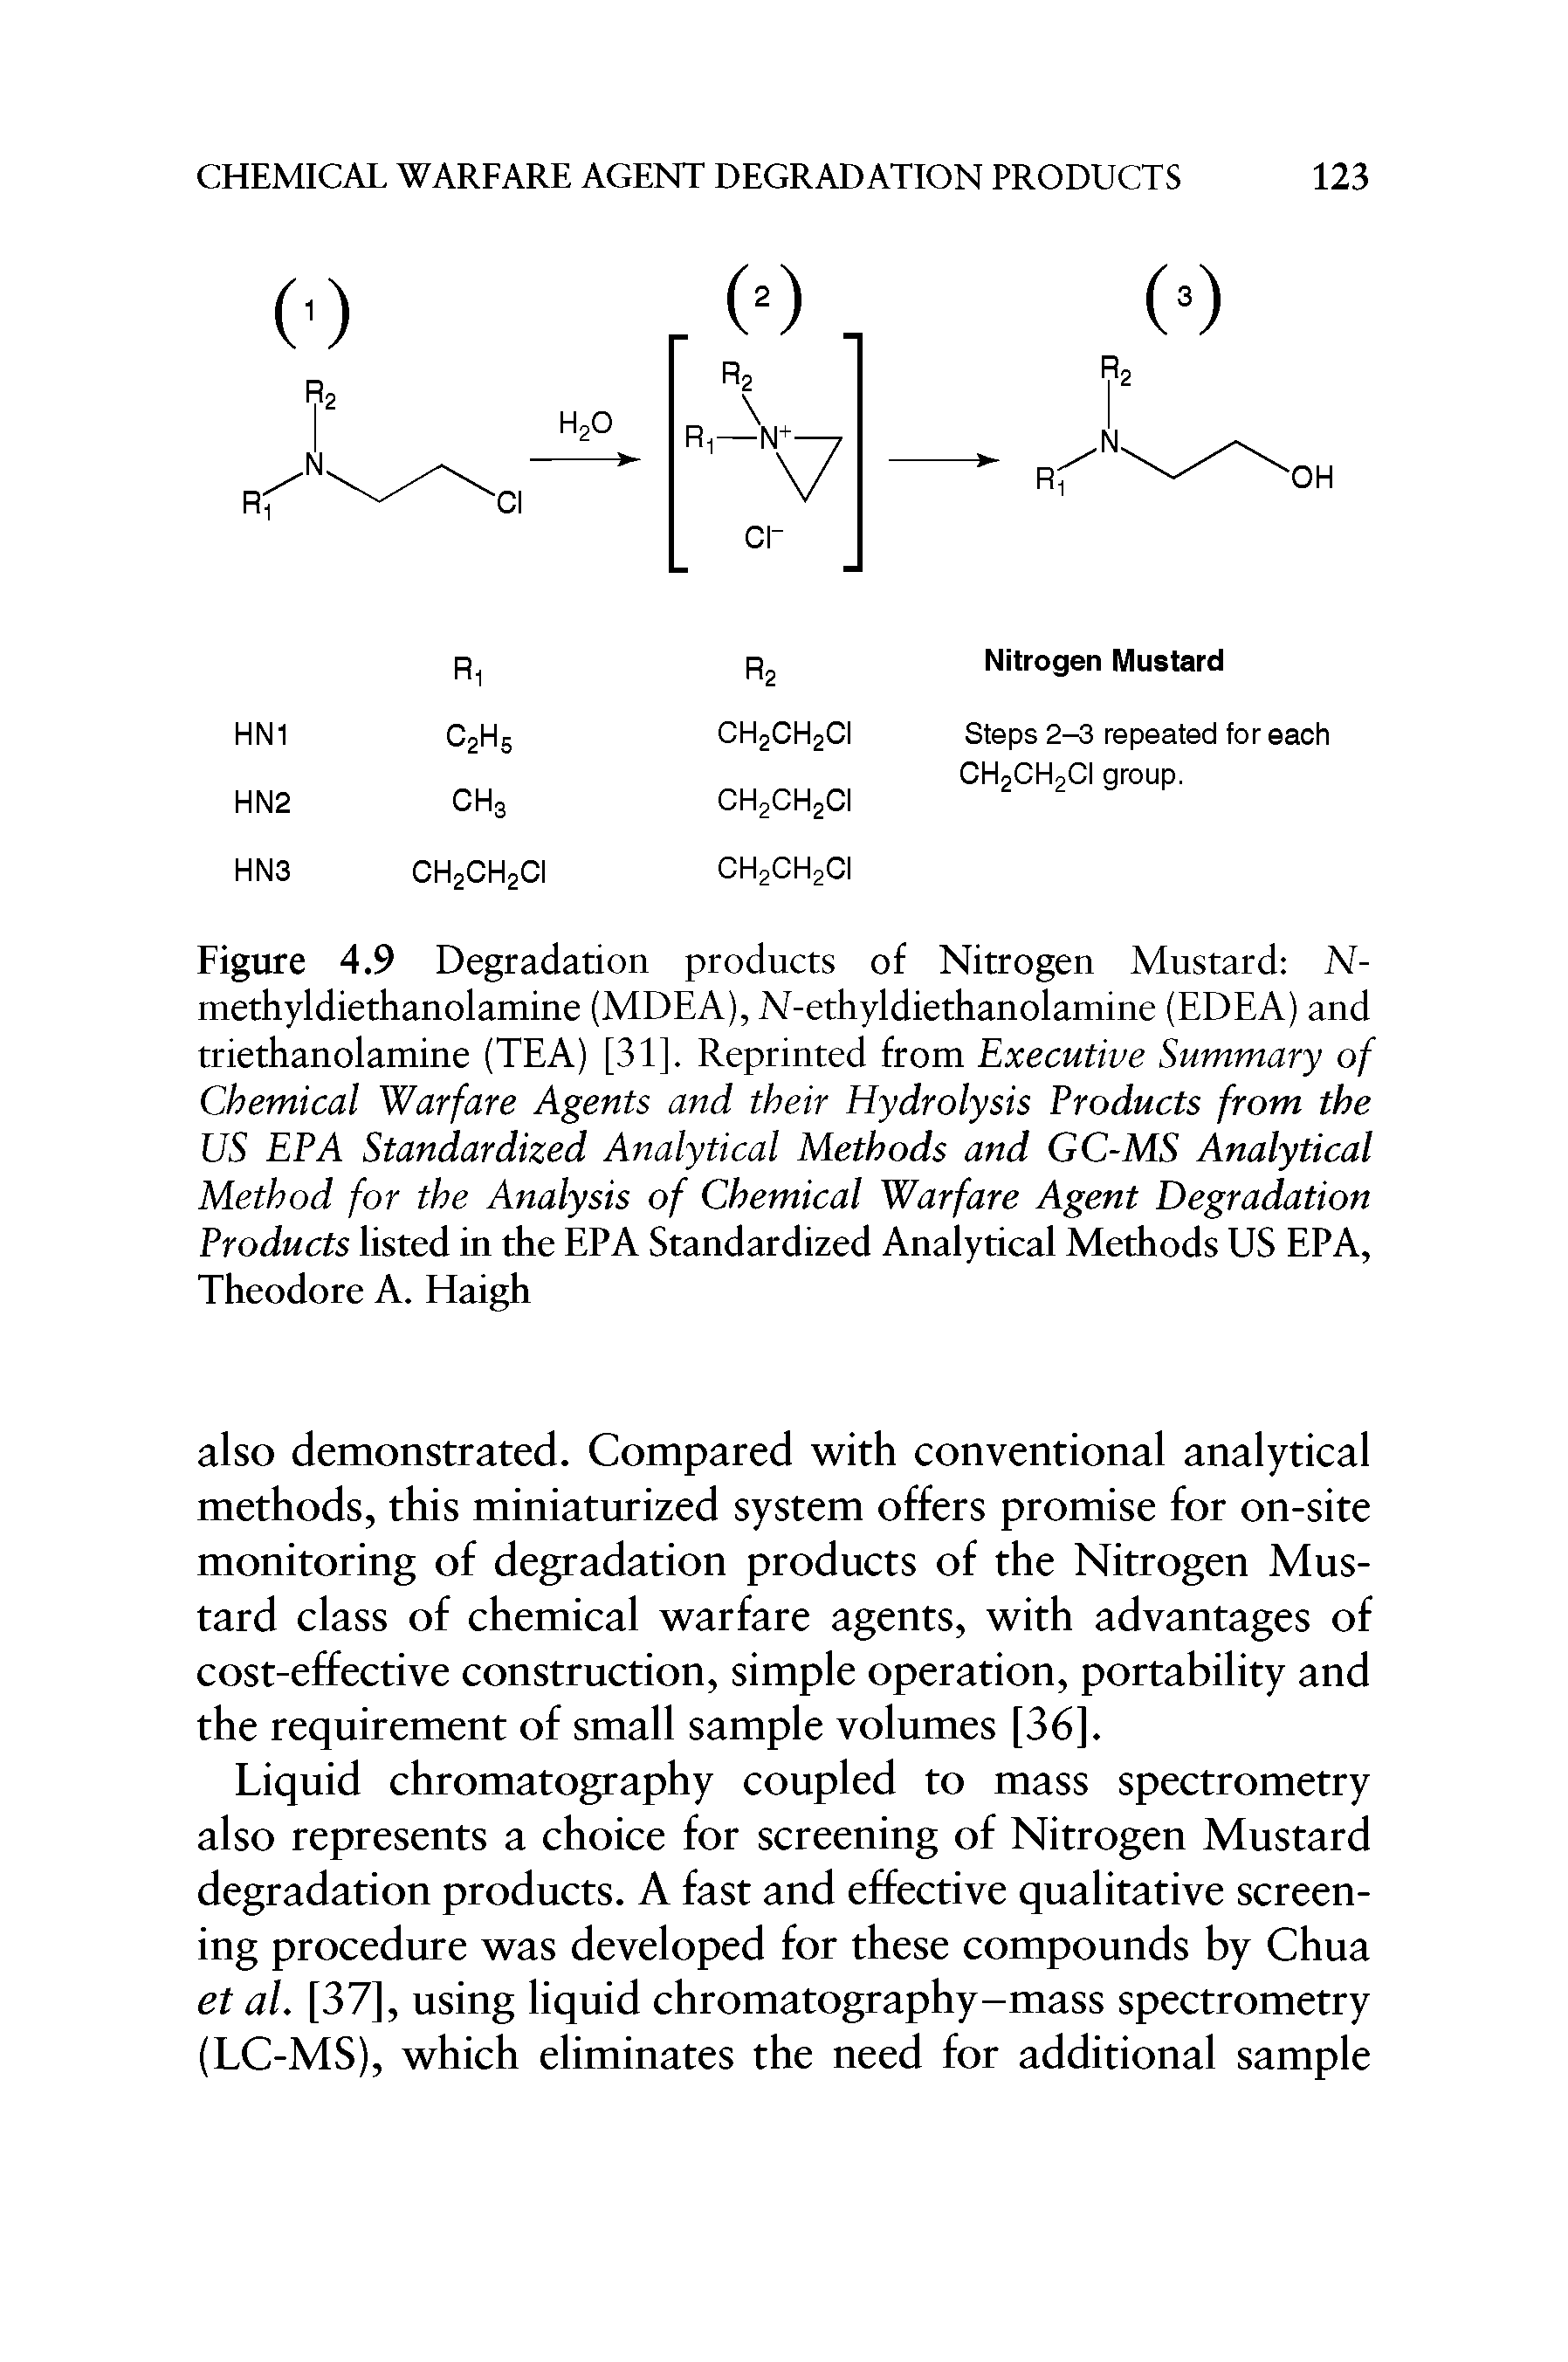 Figure 4.9 Degradation products of Nitrogen Mustard N-methyldiethanolamine (MDEA), N-ethyldiethanolamine (EDEA) and triethanolamine (TEA) [31]. Reprinted from Executive Summary of Chemical Warfare Agents and their Hydrolysis Products from the US EPA Standardized Analytical Methods and GC-MS Analytical Method for the Analysis of Chemical Warfare Agent Degradation Products listed in the EPA Standardized Analytical Methods US EPA, Theodore A. Haigh...